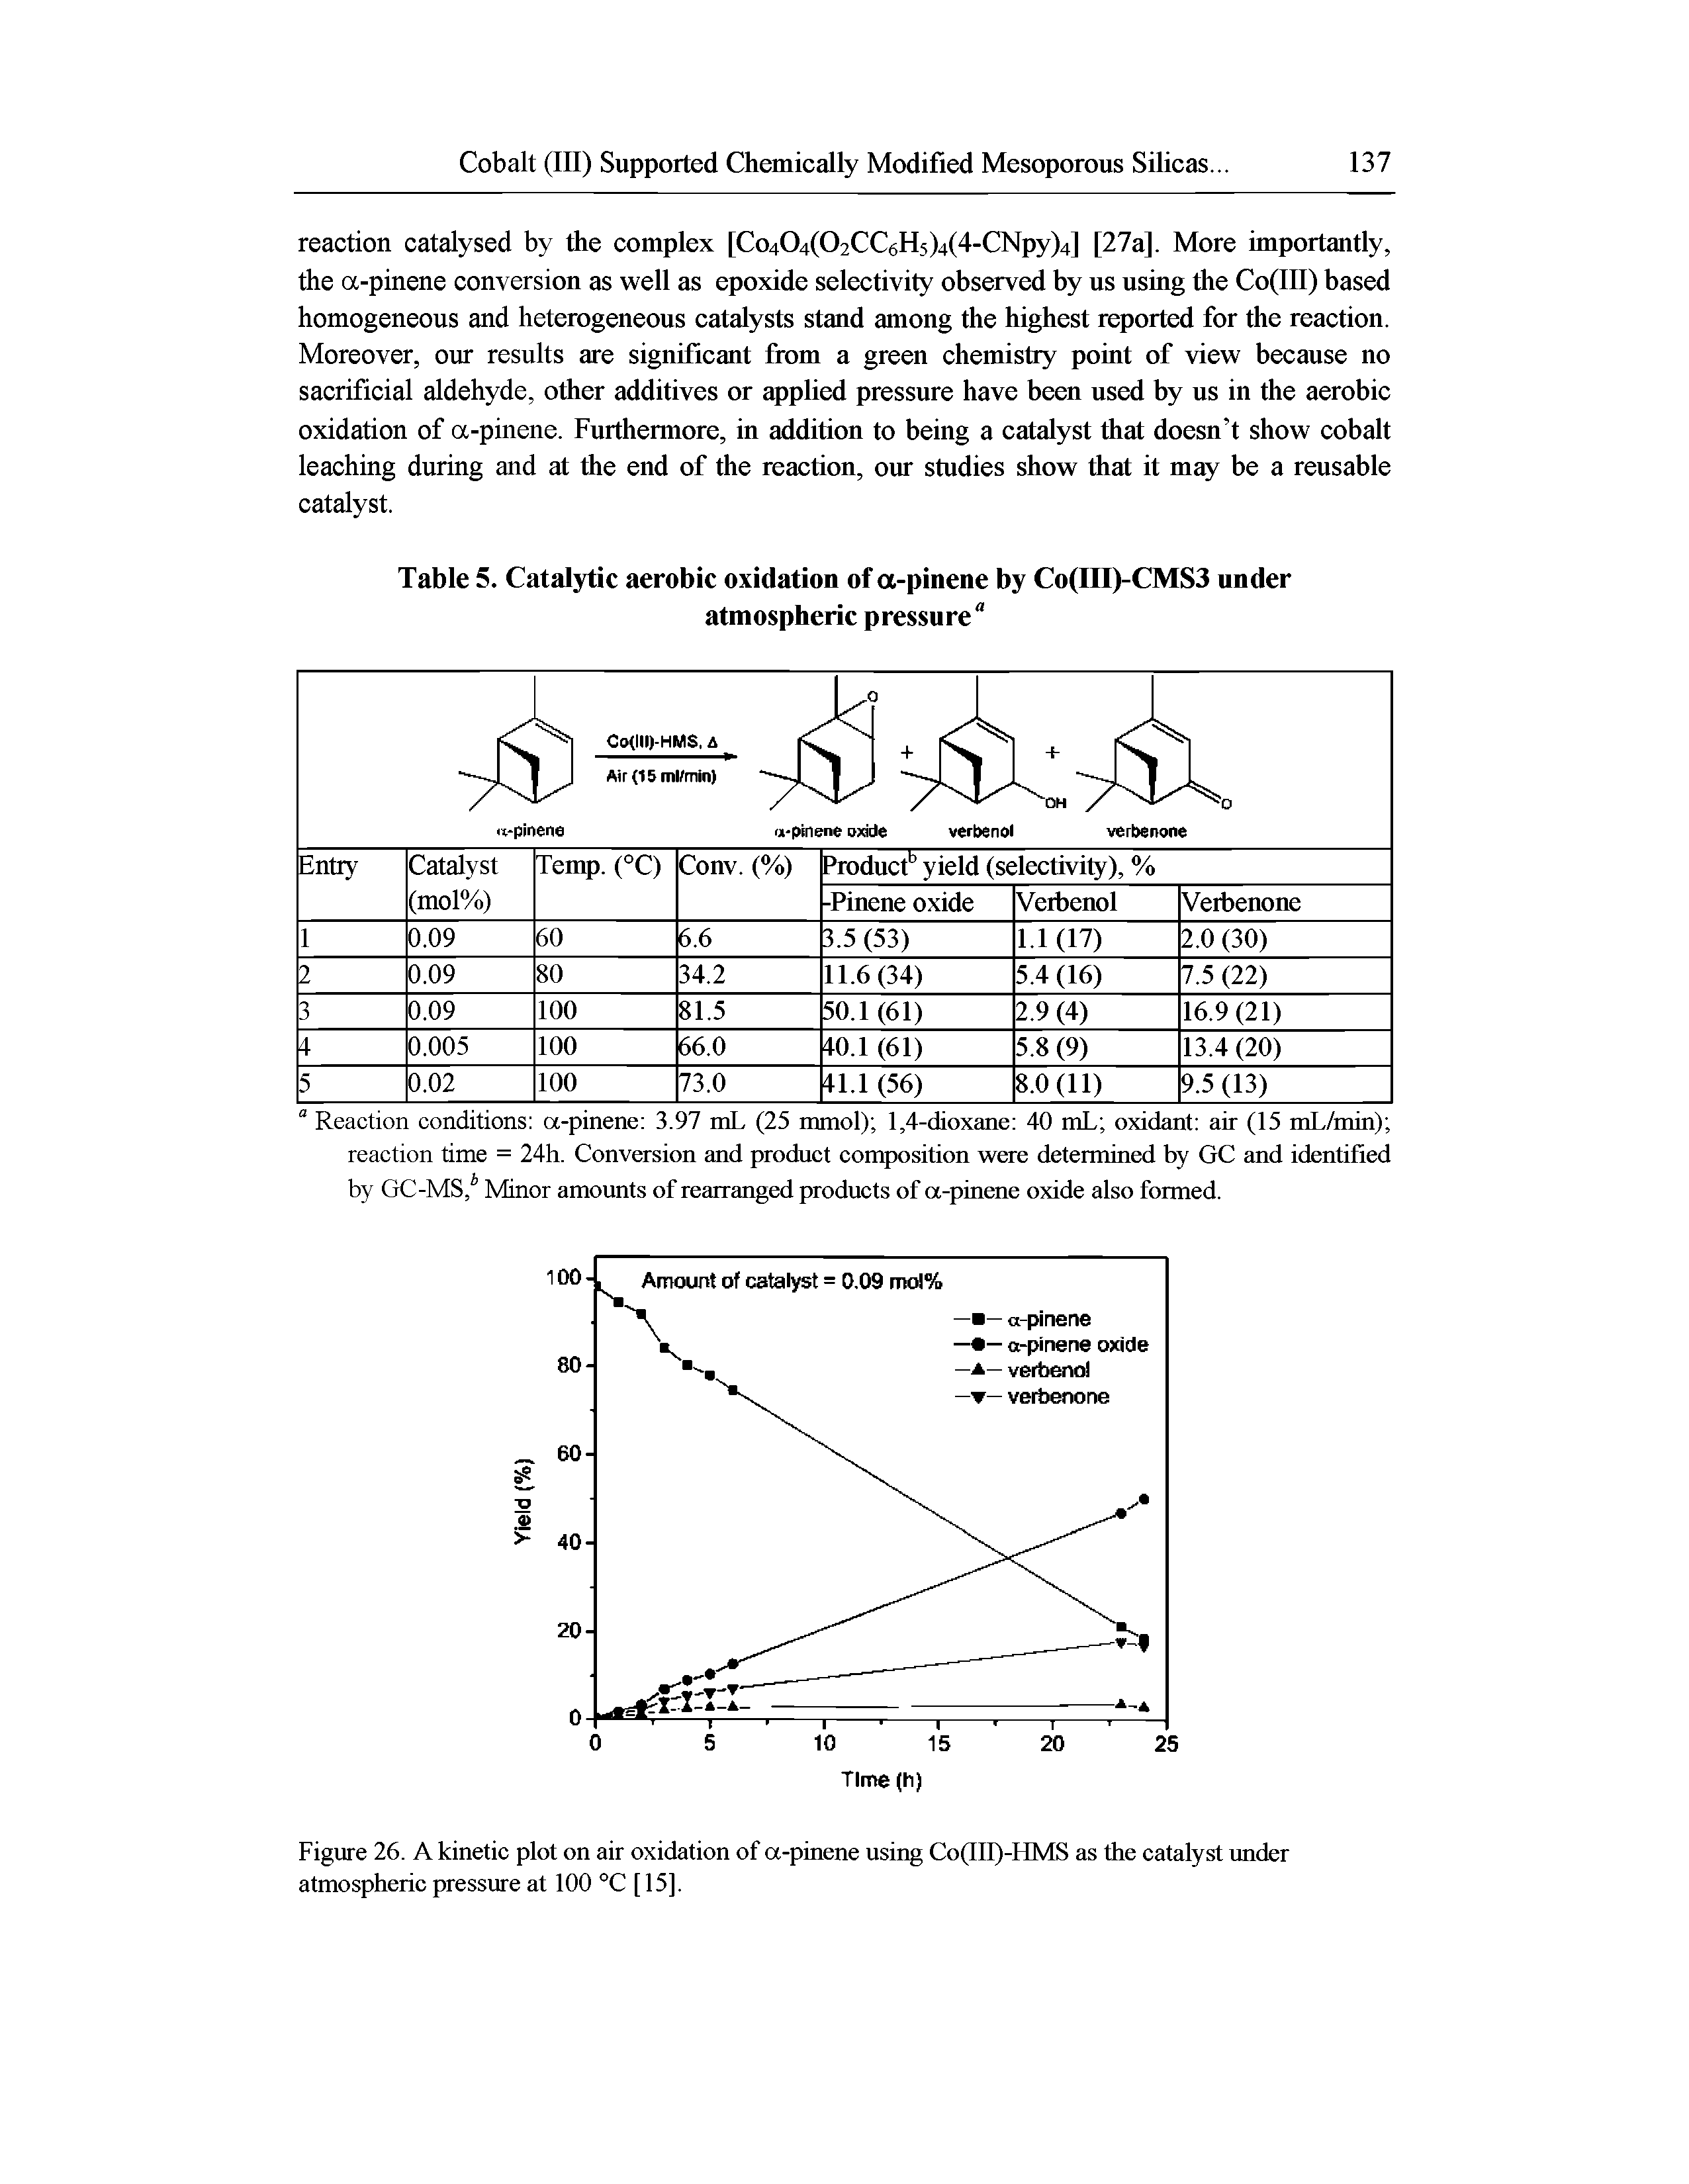 Figure 26. A kinetic plot on air oxidation of a-pinene using Co(III)-HMS as the catalyst rmder atmospheric pressure at 100 °C [ 15].